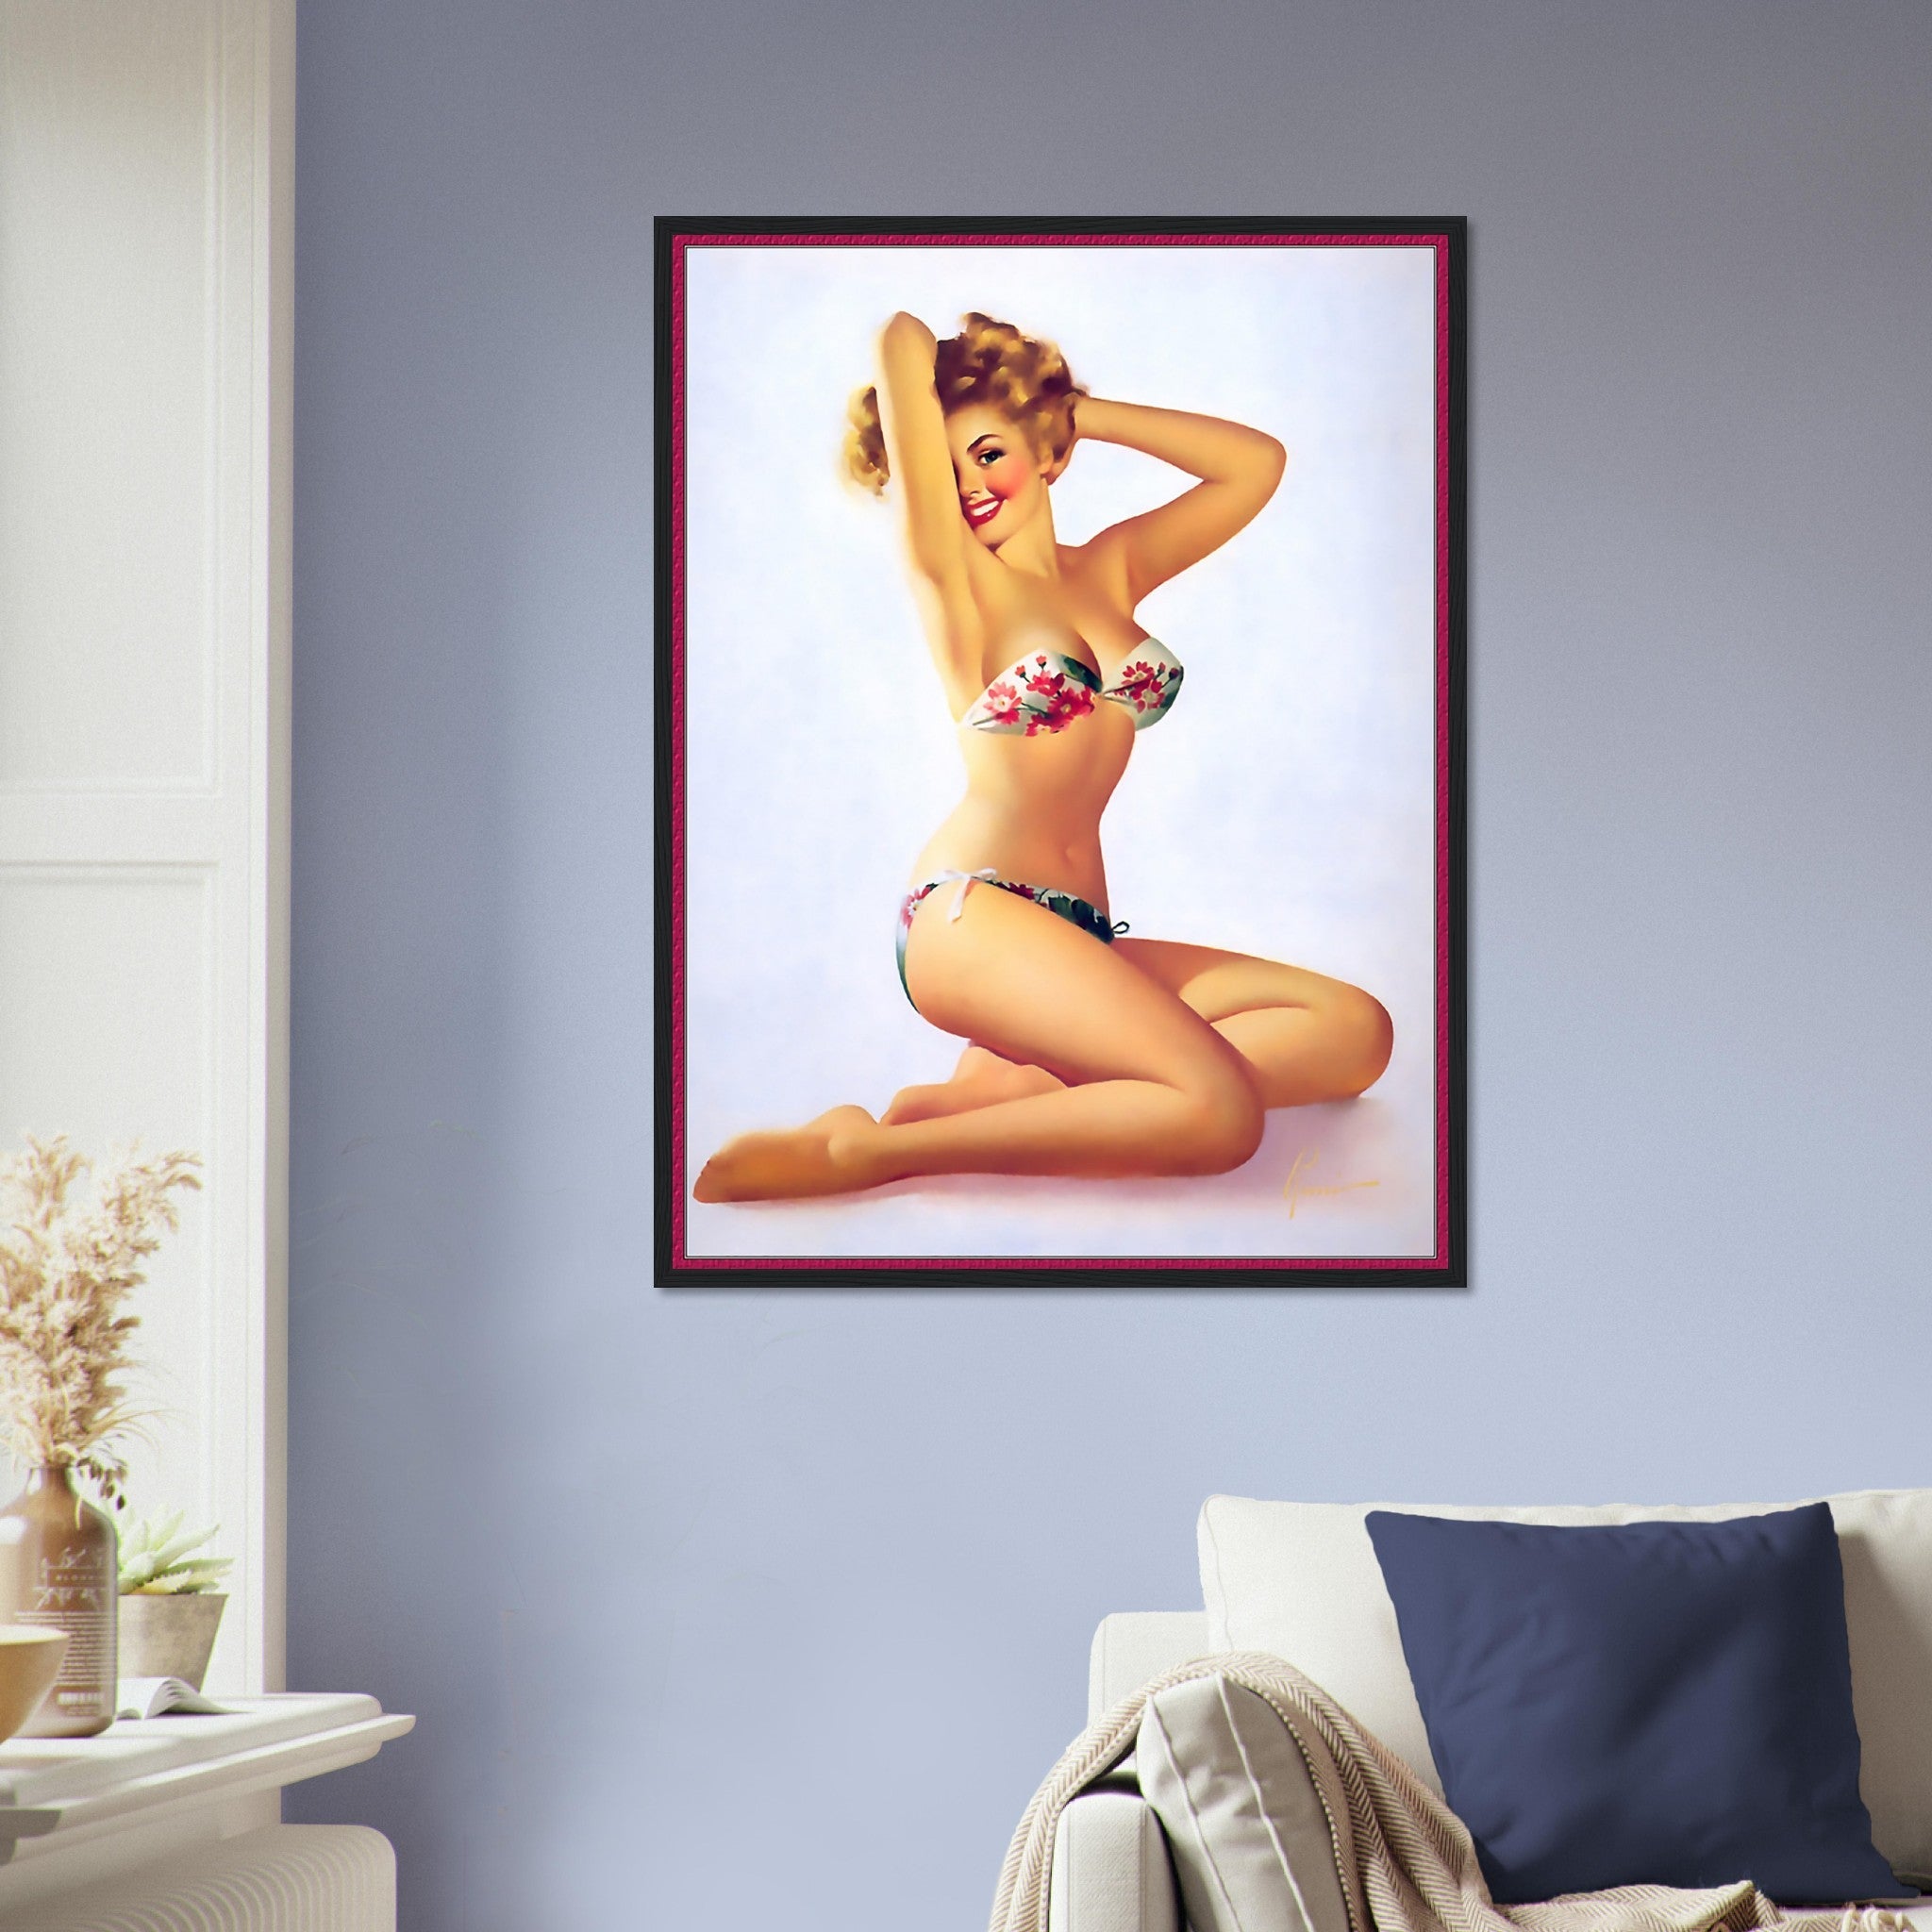 Vintage Pin Up Girl Framed, Red Flowers On Bikini - Edward Runci - Vintage Art - Retro Pin Up Girl Framed Print - Late 1940'S - 1950'S - WallArtPrints4U